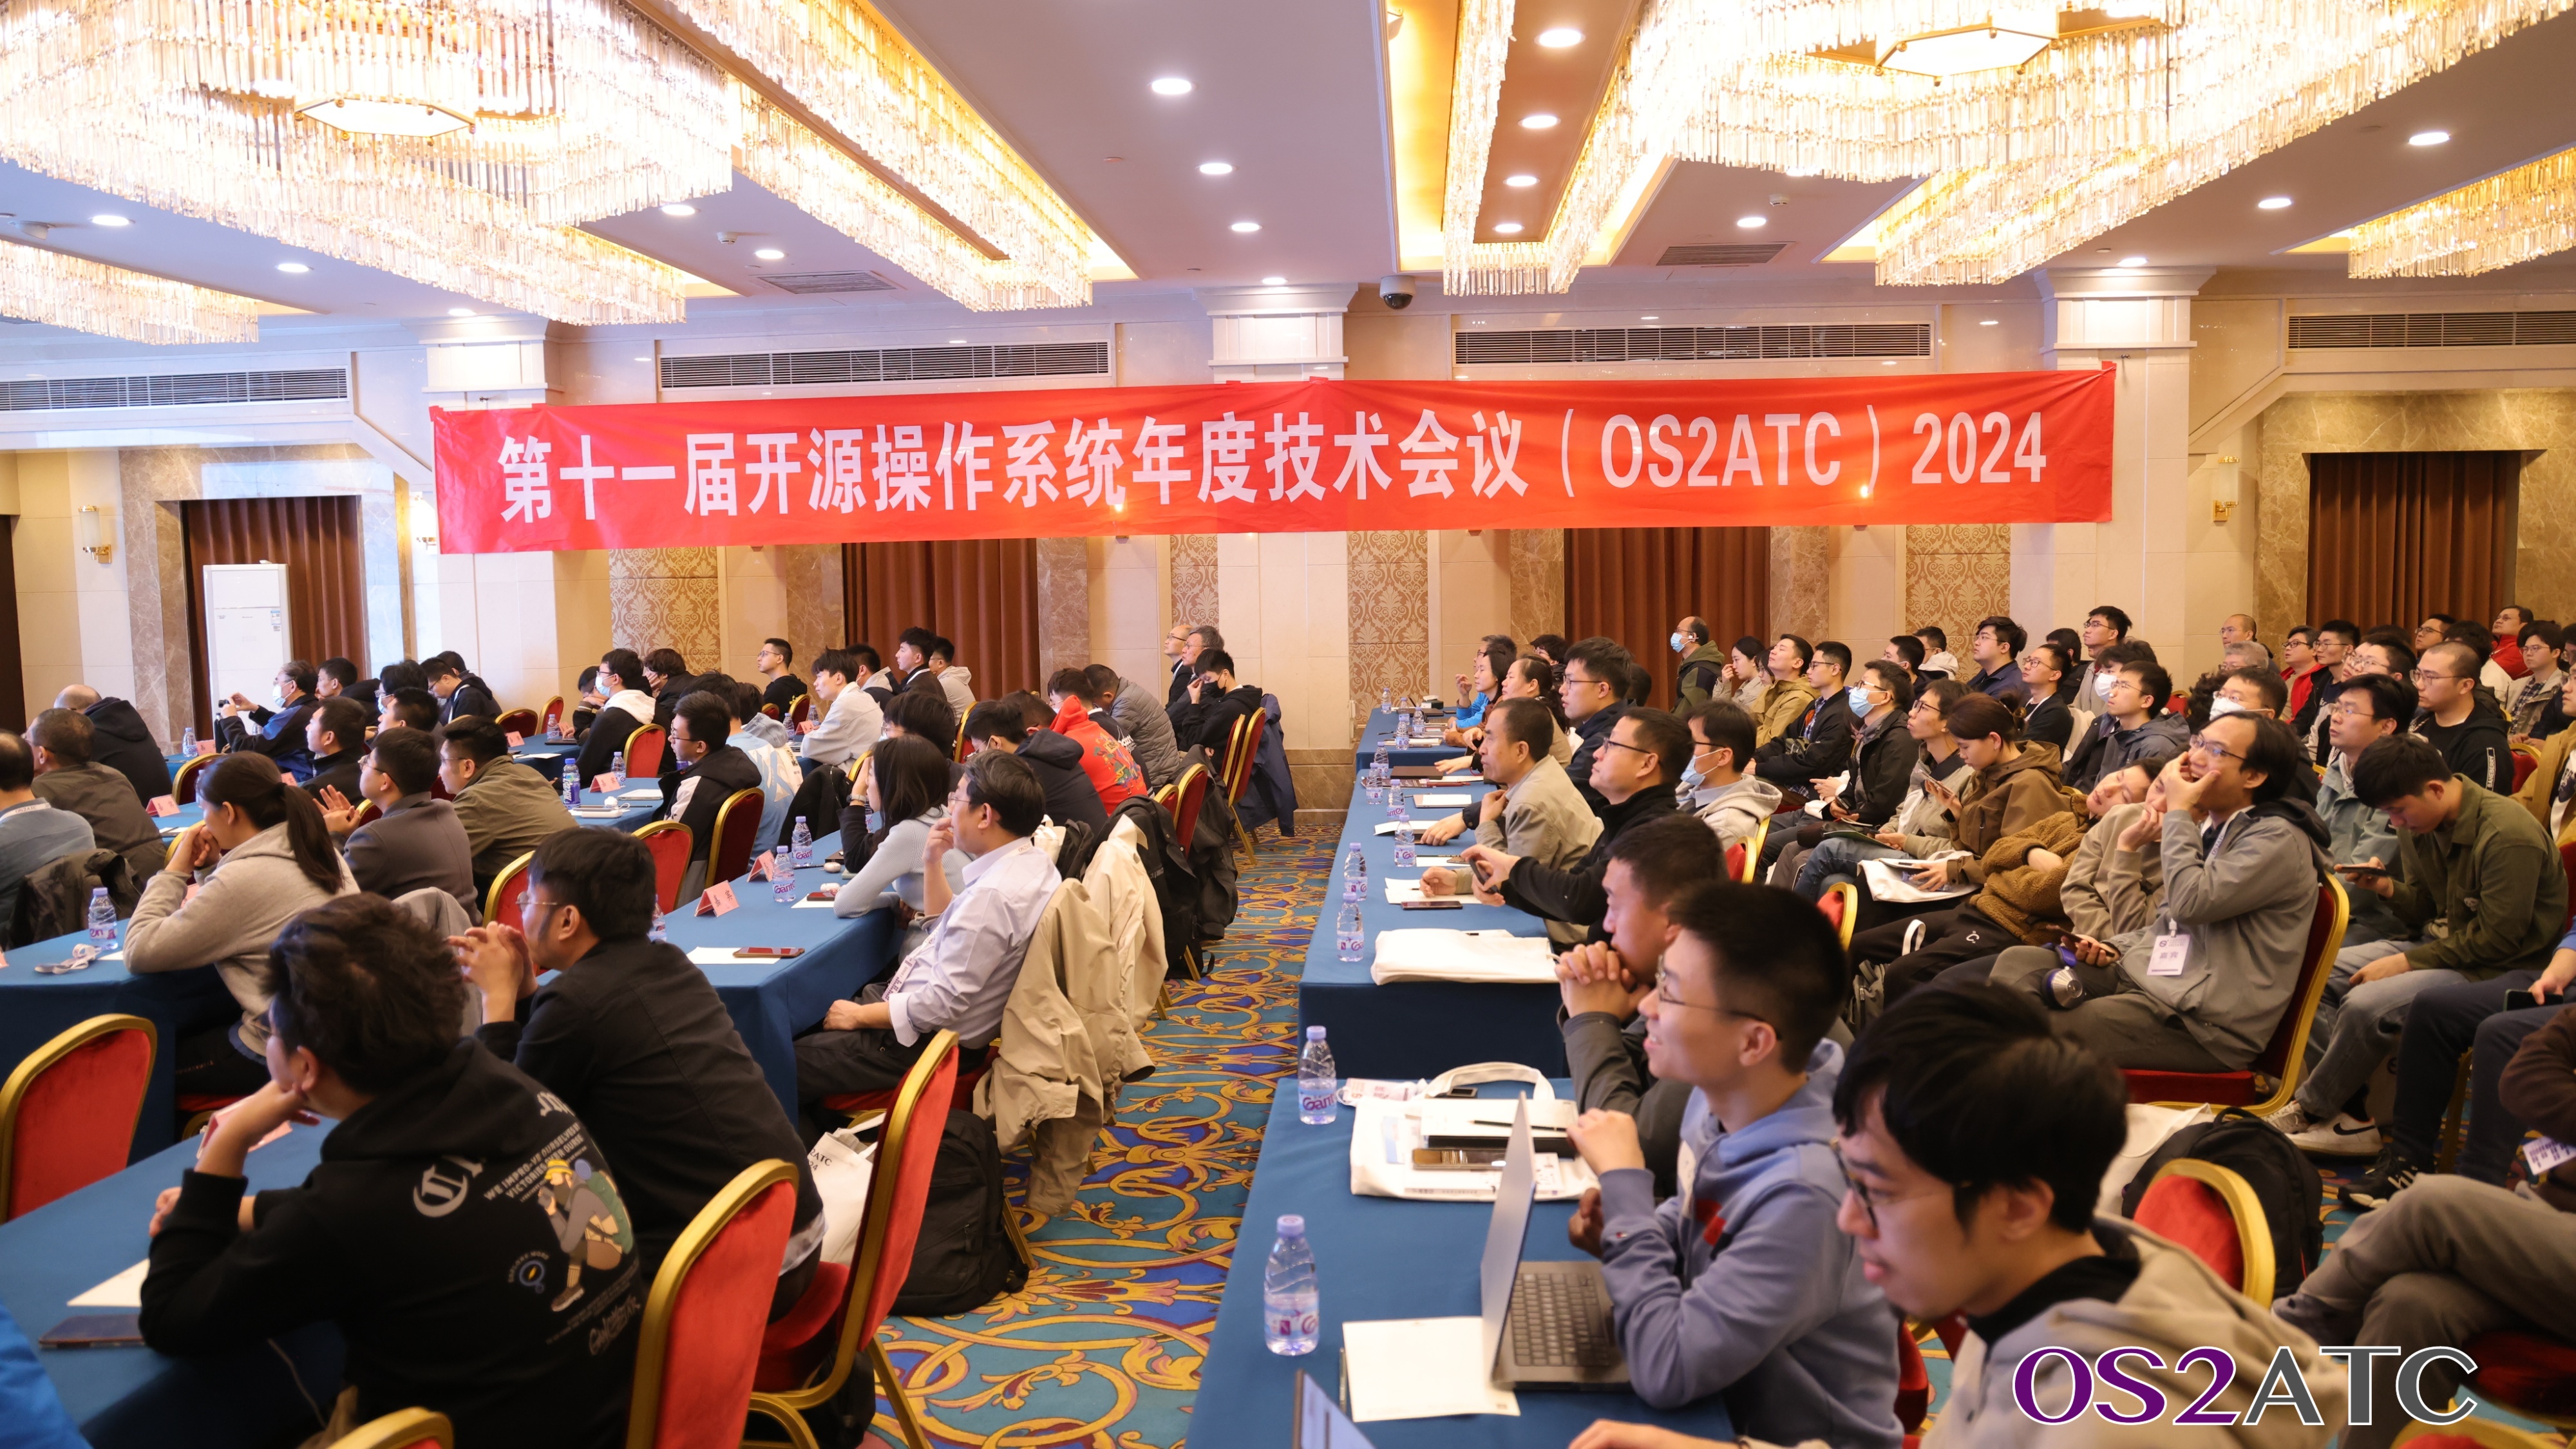 Many operating system experts and enthusiasts attend OS2ATC